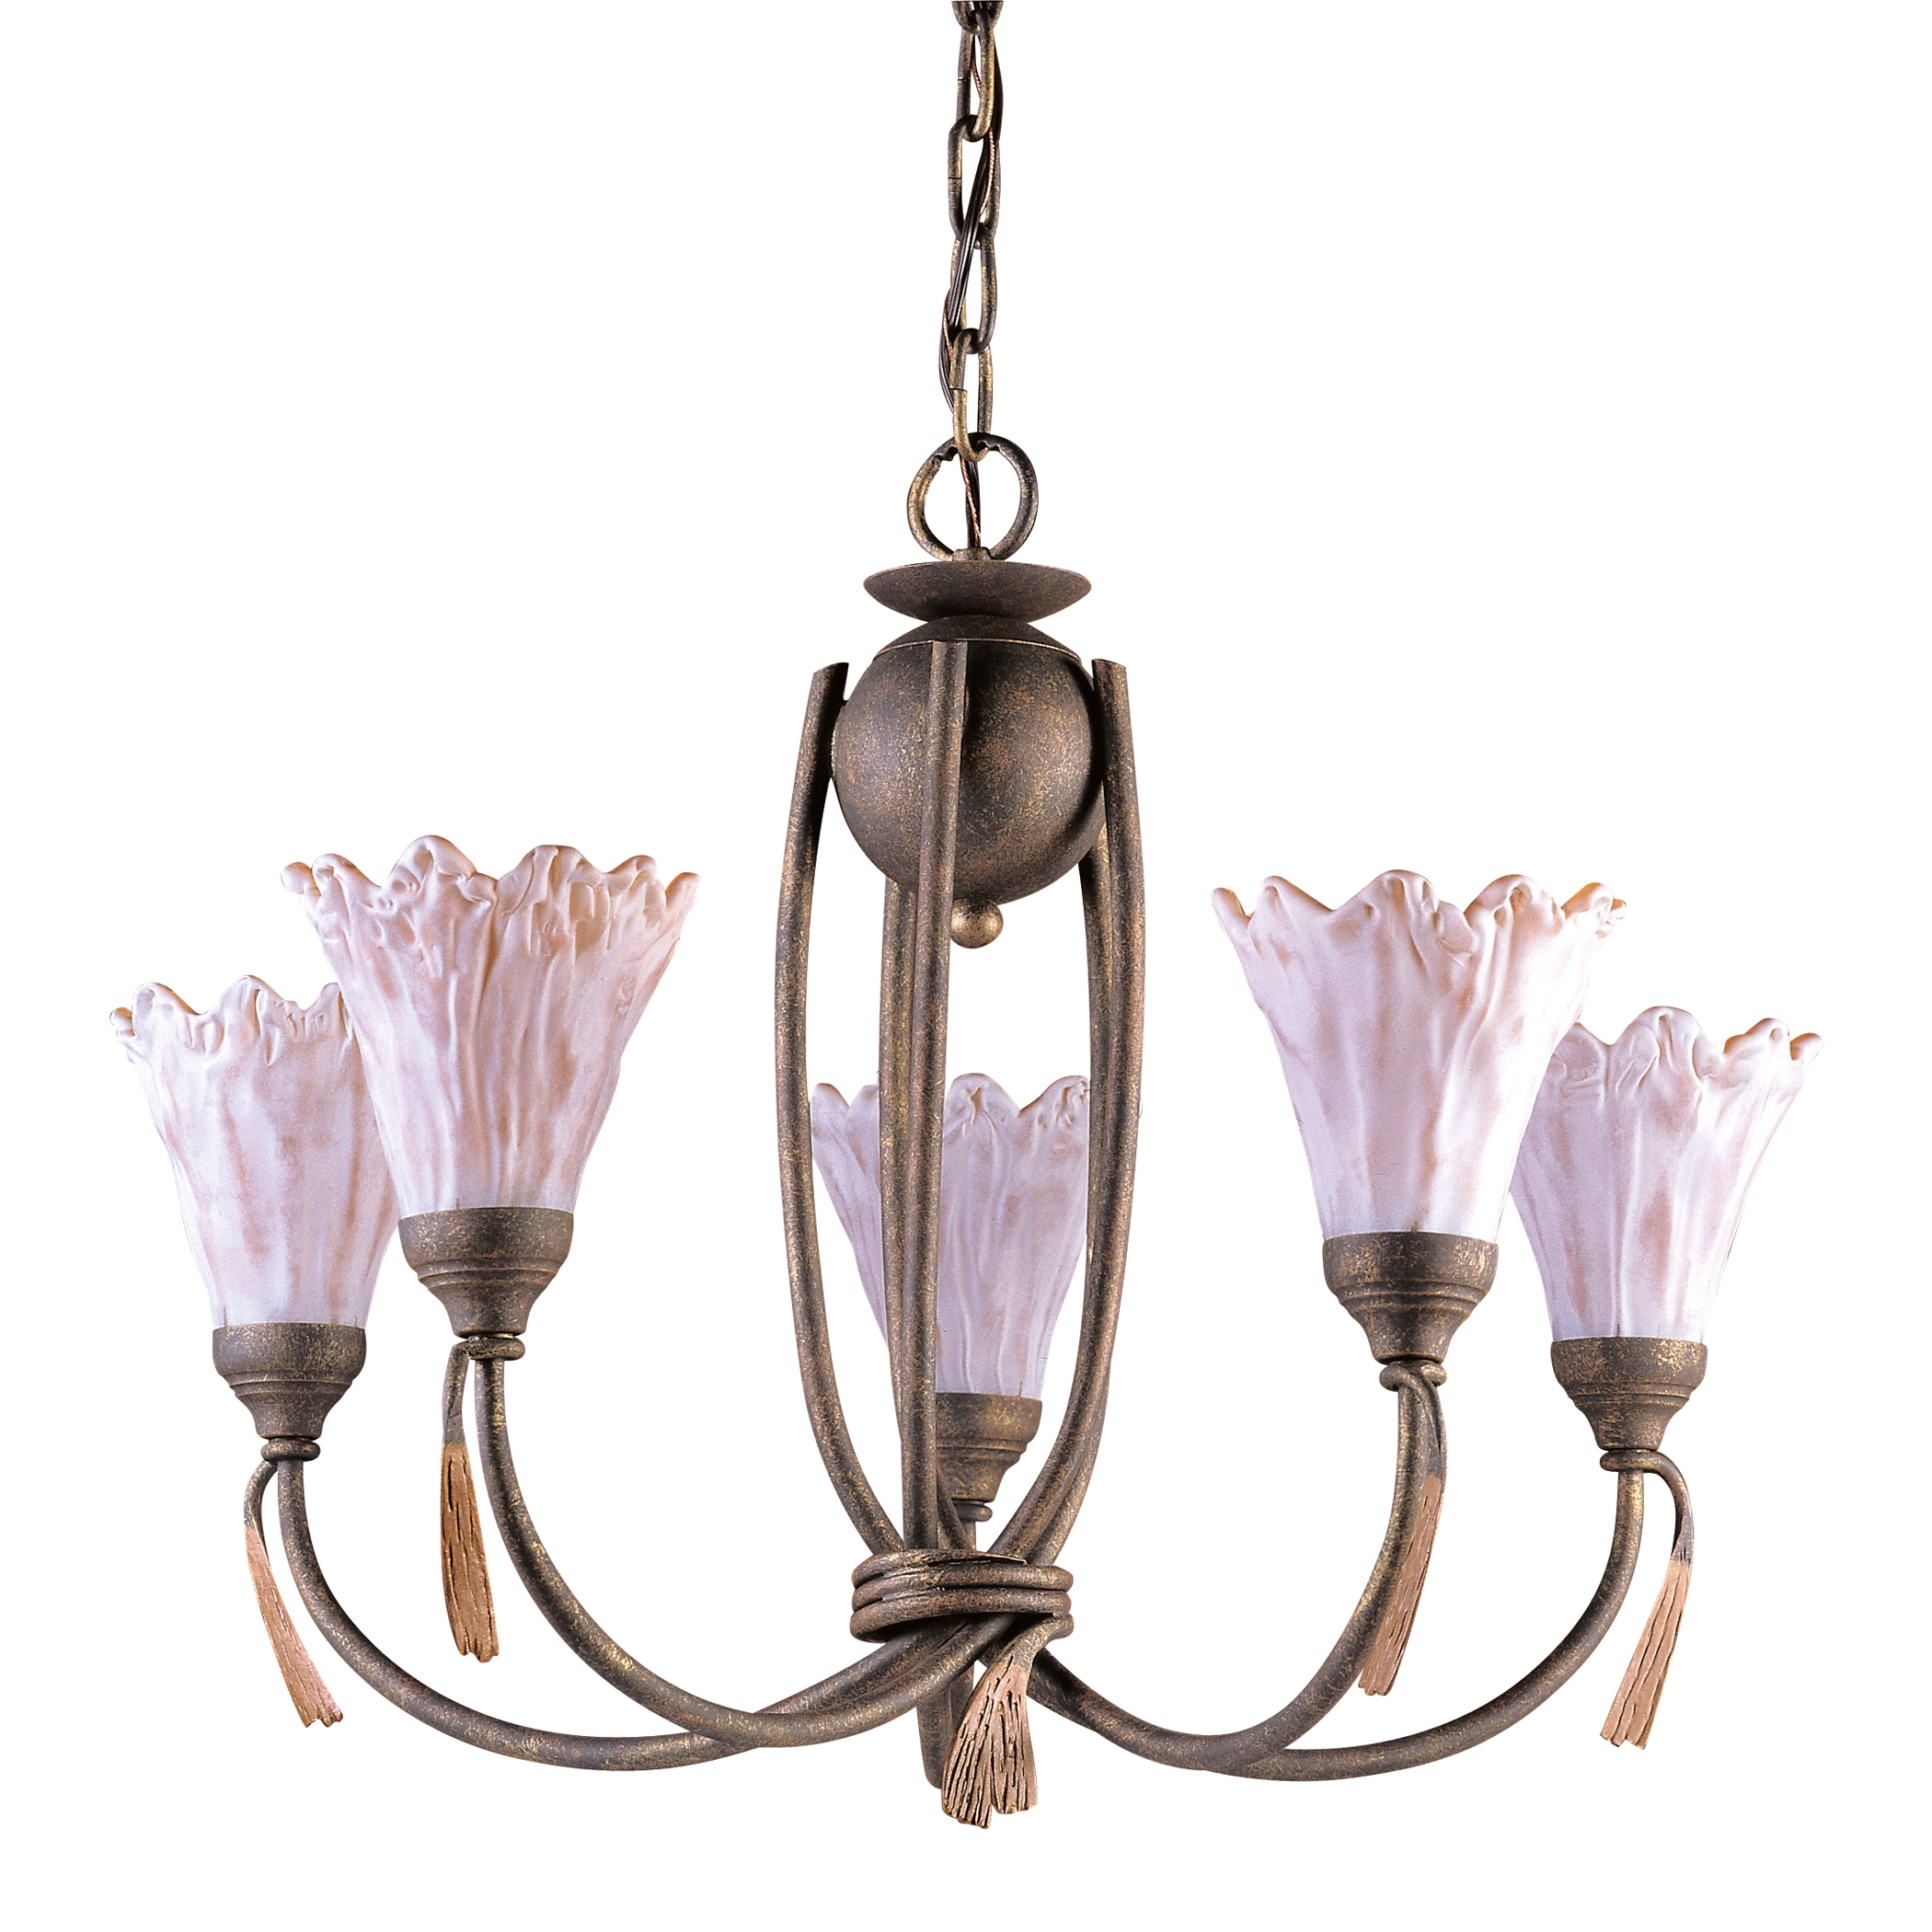 Villa D-Eleganza 5-Light Chandelier in Olde World Finish with Floral-look Shades - Image 0